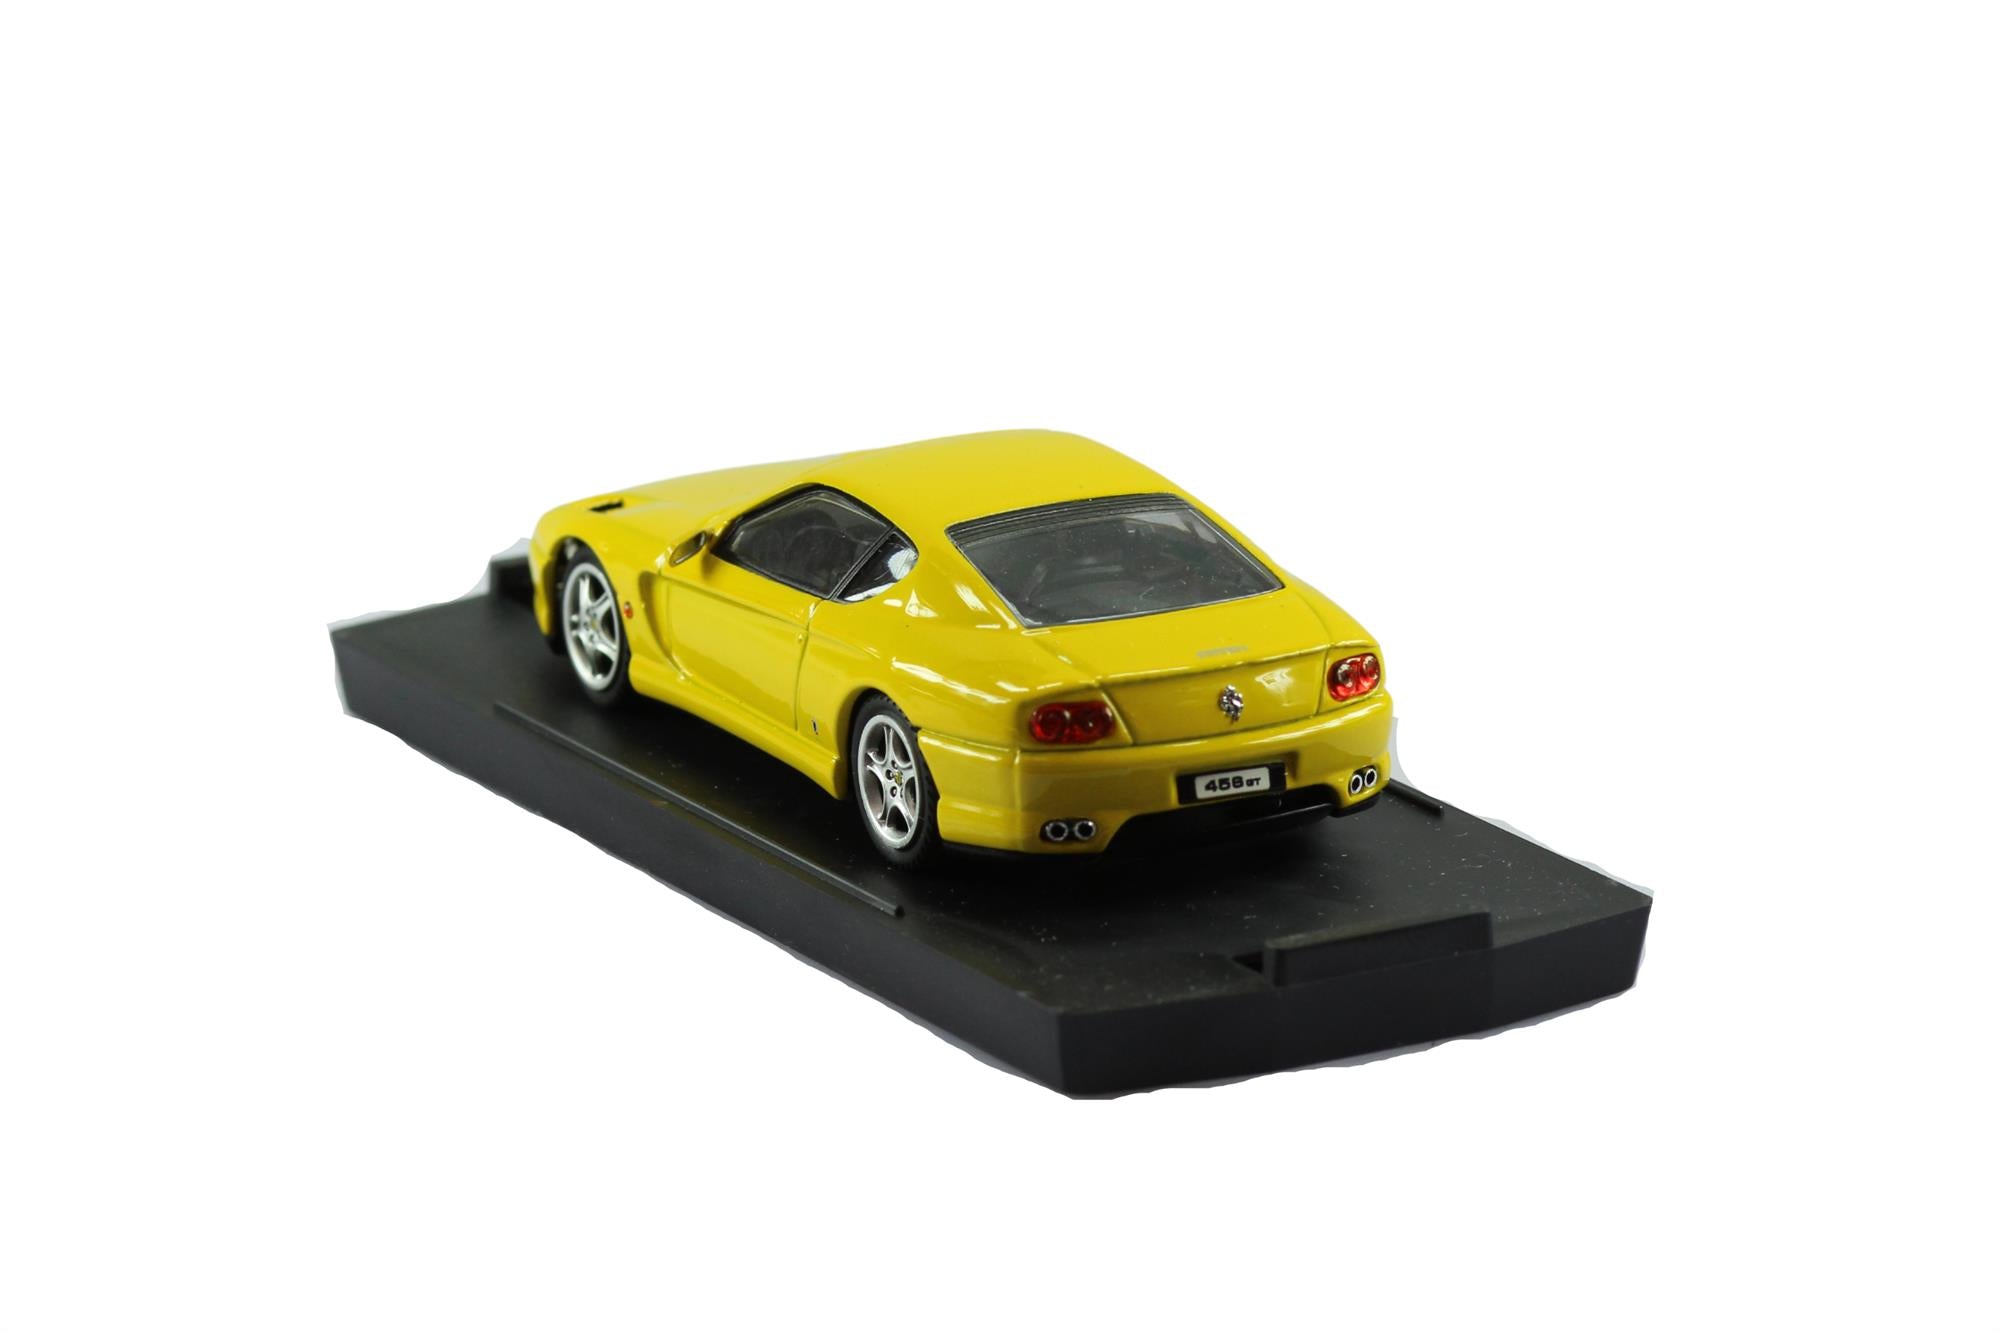 Bang Models - 1:43 Scale Diecast Ferrari 456 GT "Stradale" in Yellow - Made in Italy - Toptoys2u